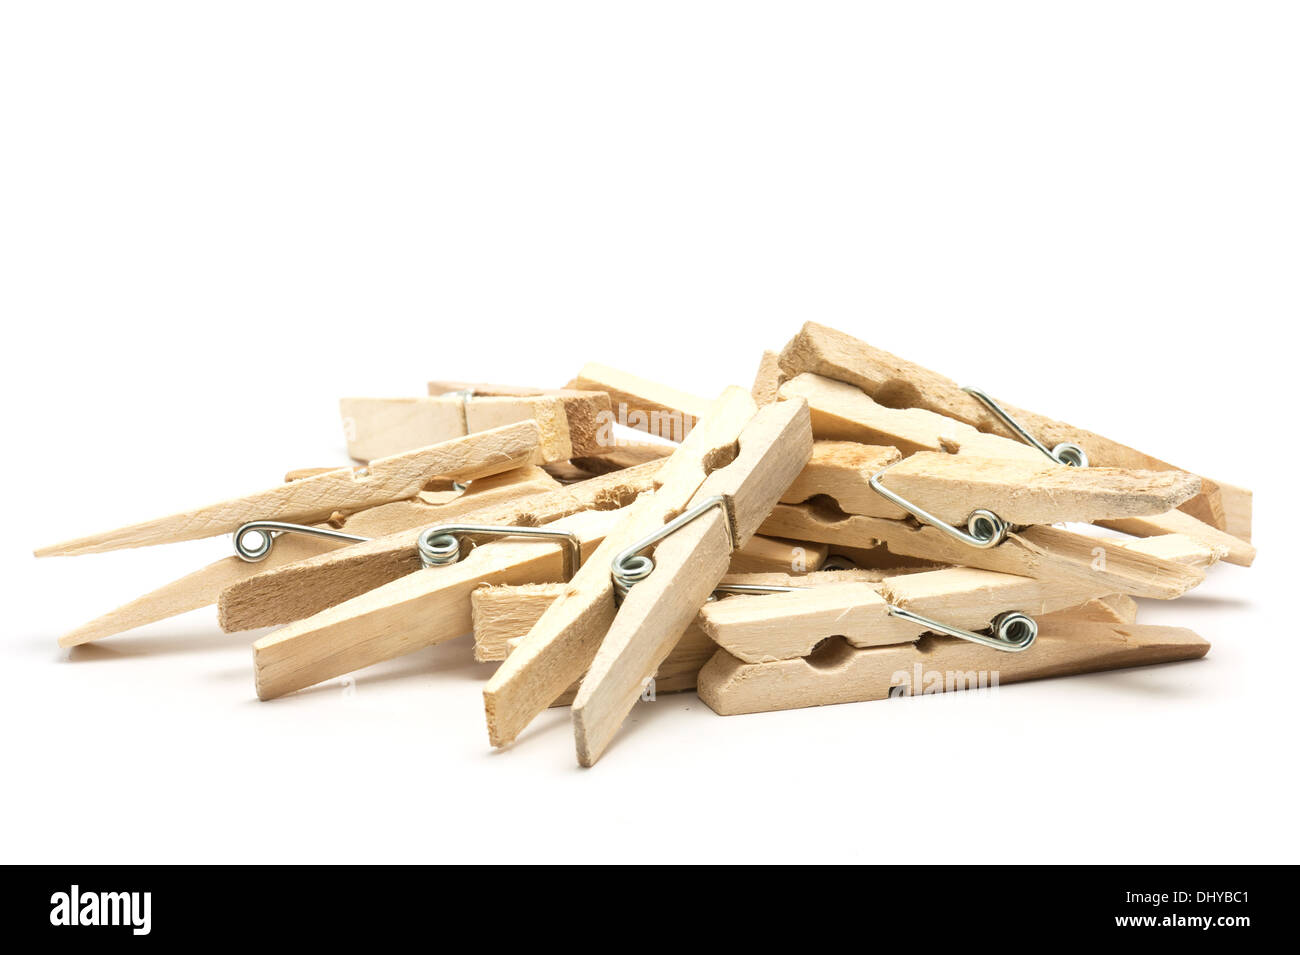 Clothespins wood Cut Out Stock Images & Pictures - Alamy